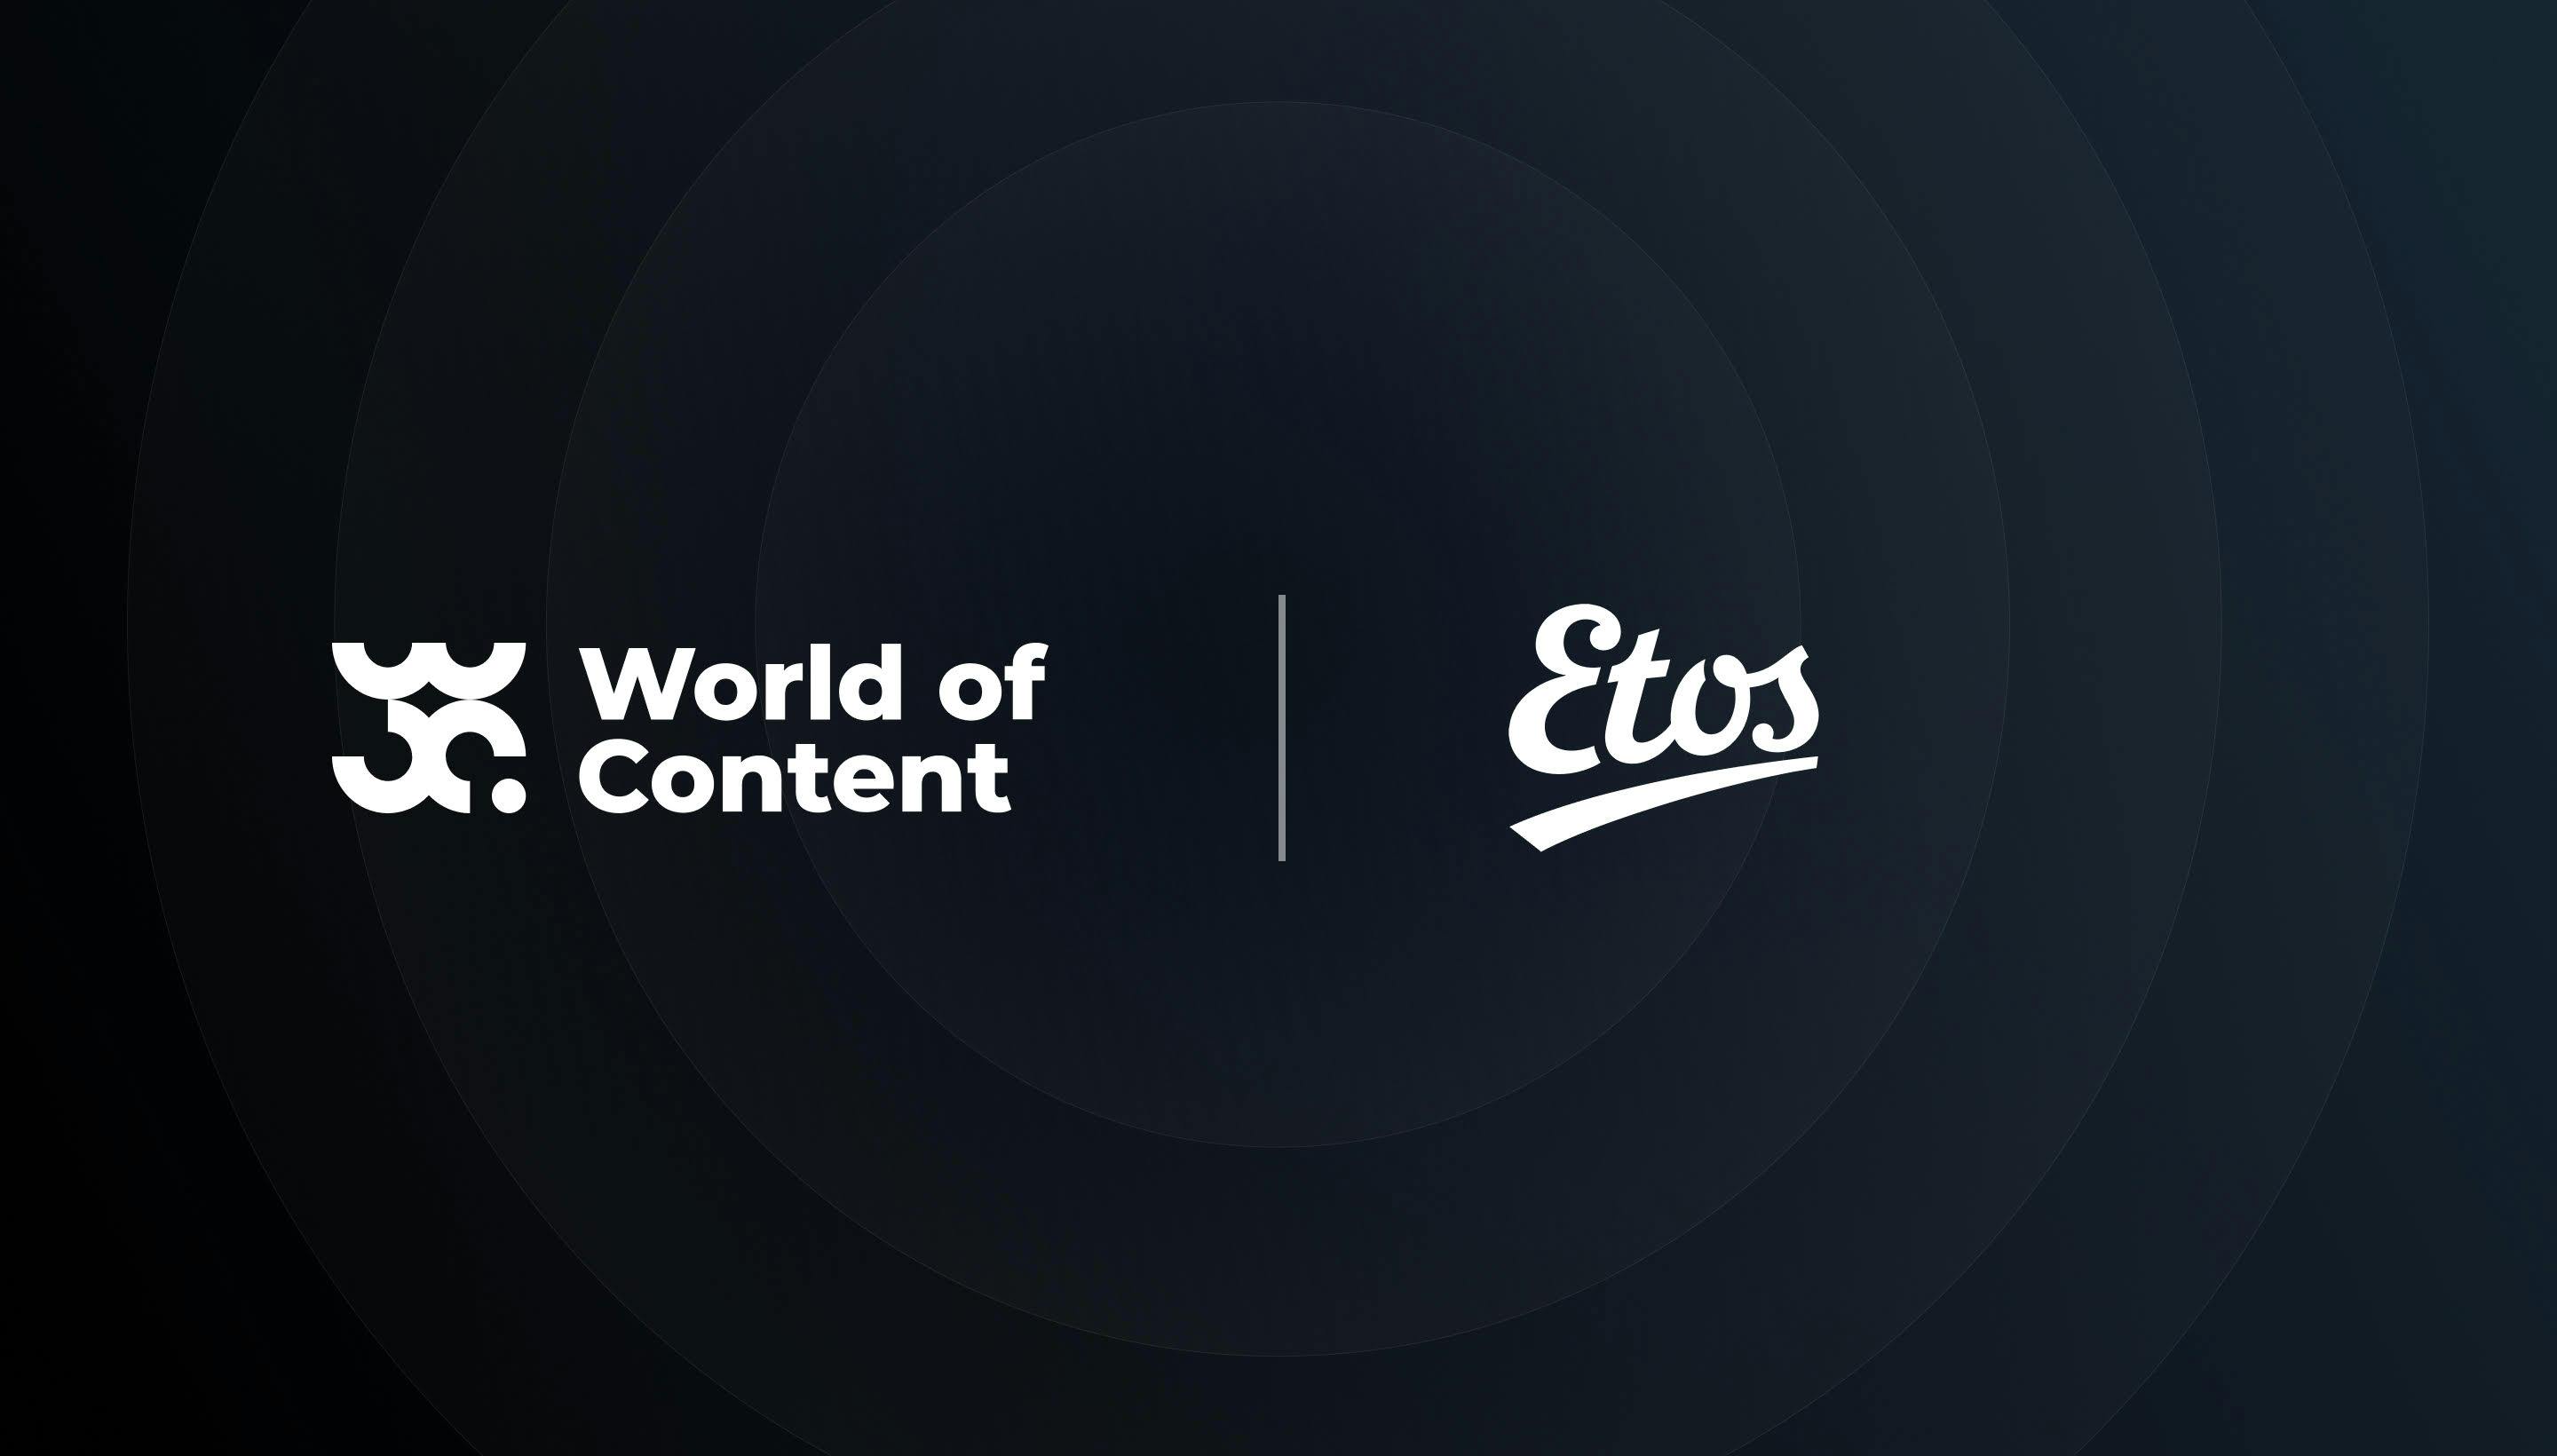 Etos World of Content ensure an optimized online customer experience | World of Content